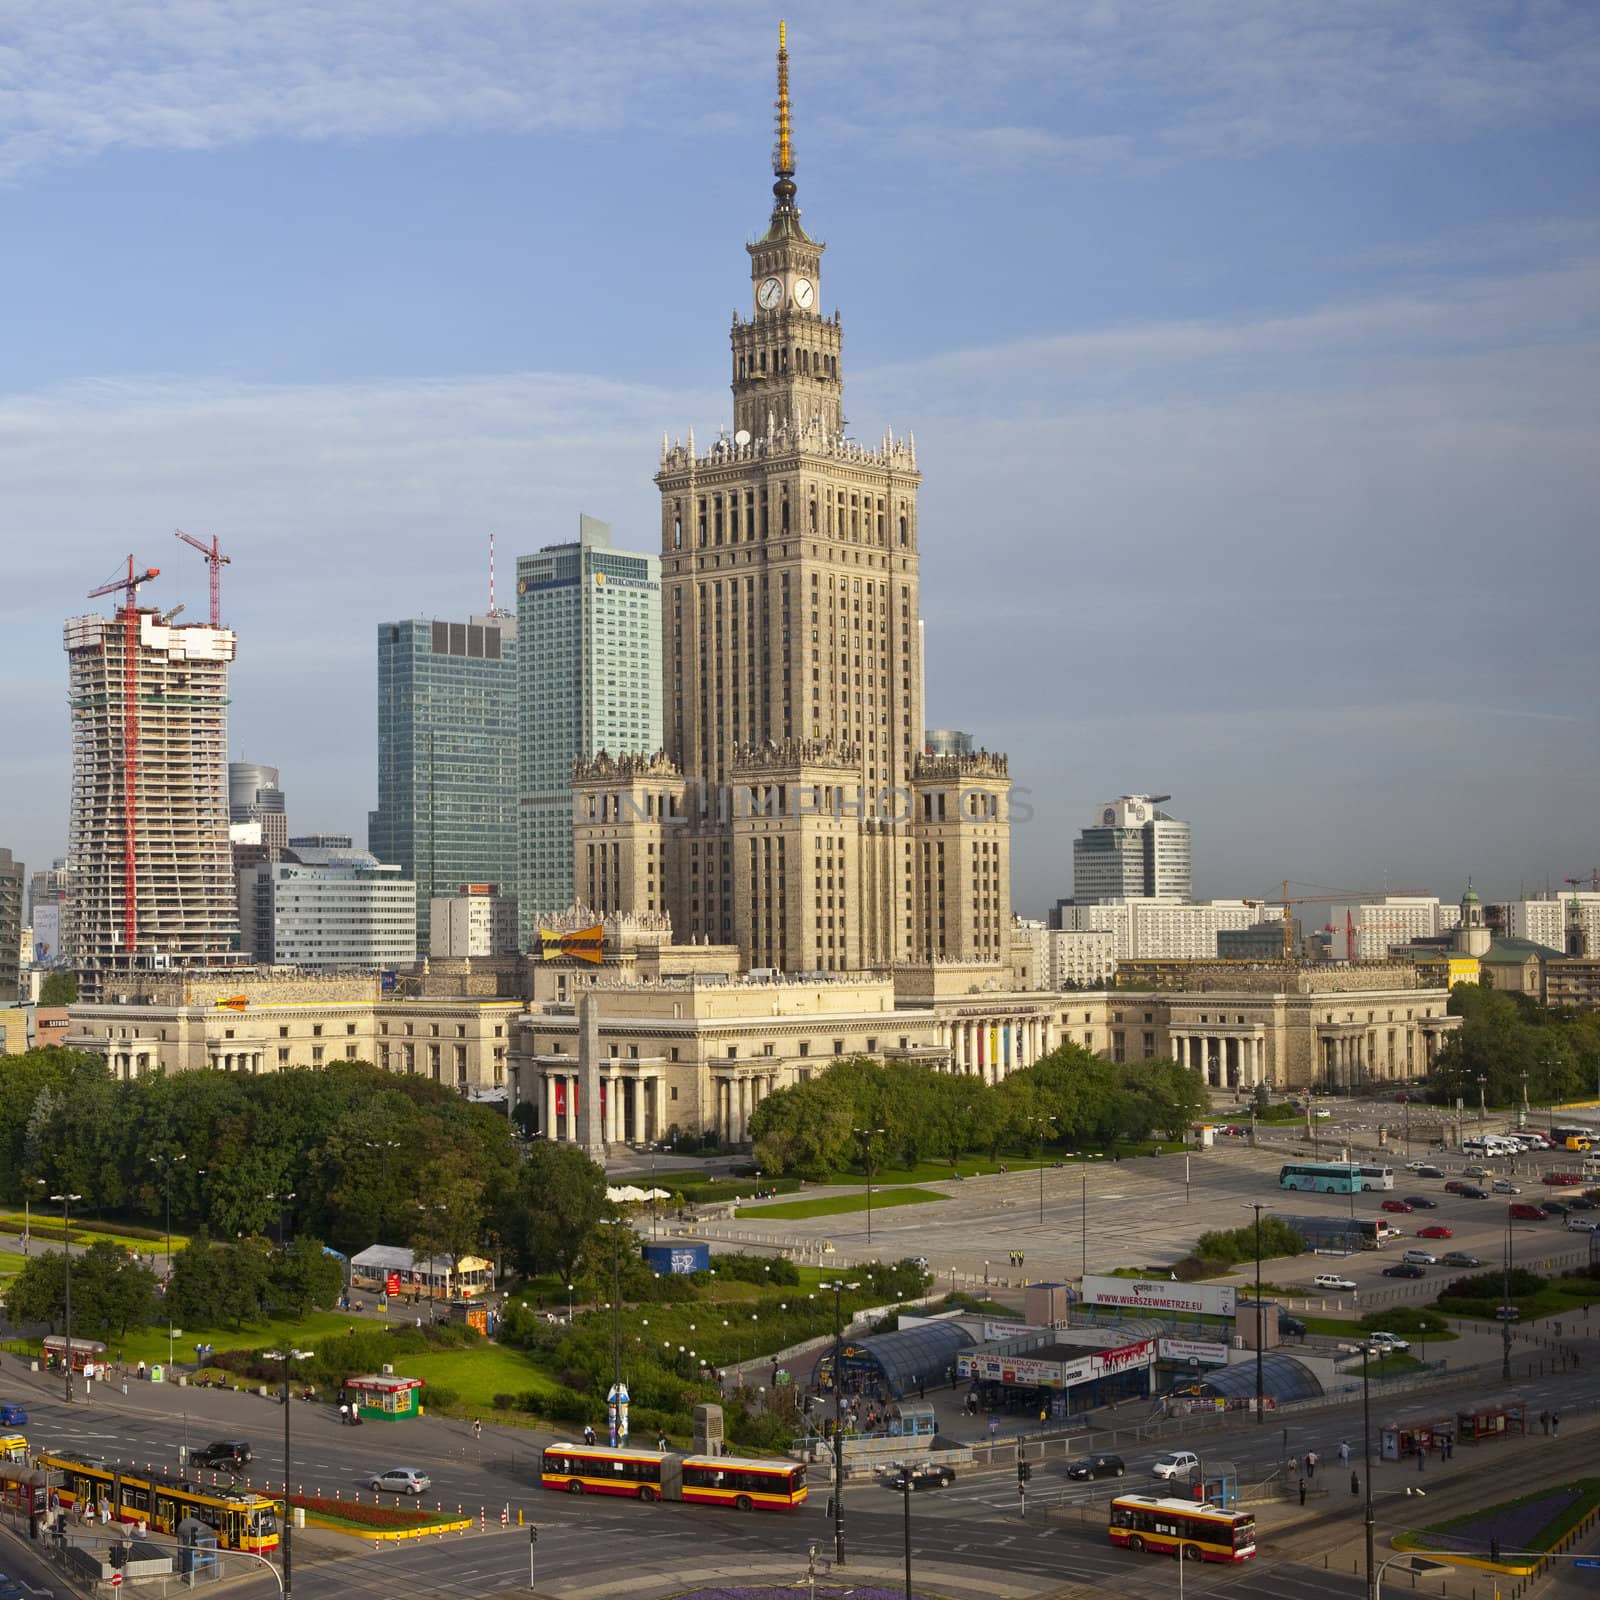 Palace of Culture and Science in Warsaw.